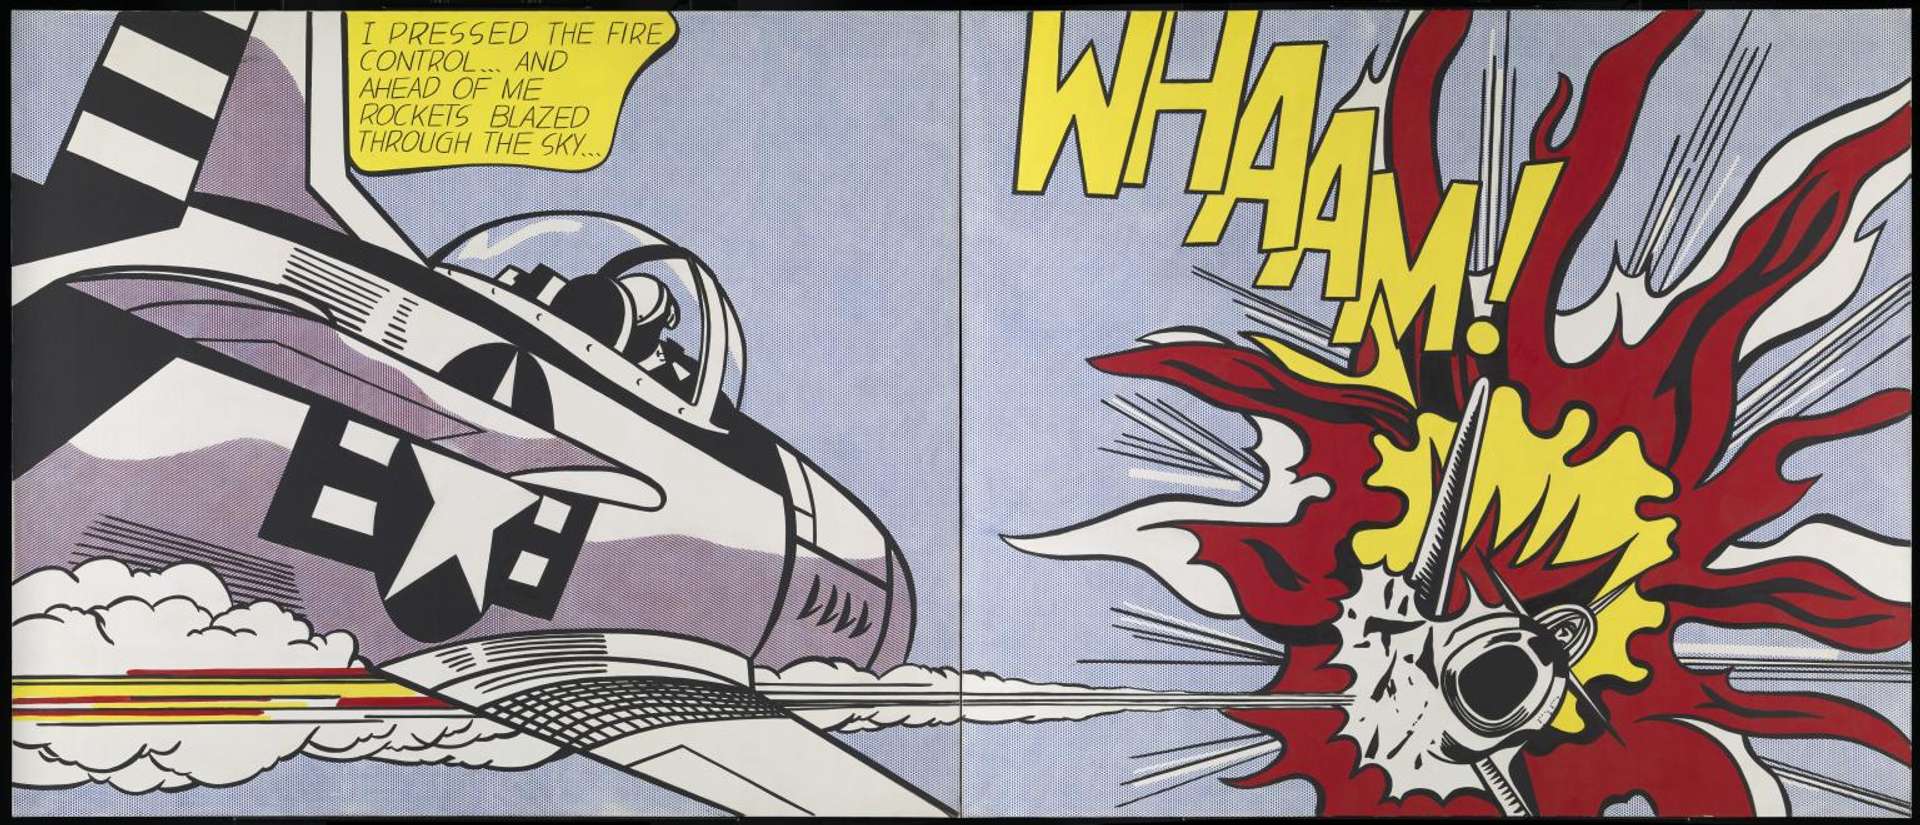 An image of the artwork Whaam! By Roy Lichtenstein, showing two fighter jets engaged in combat. One of them has been hit, and flames are seen shooting out alongside the onomatopoeia Whaam!